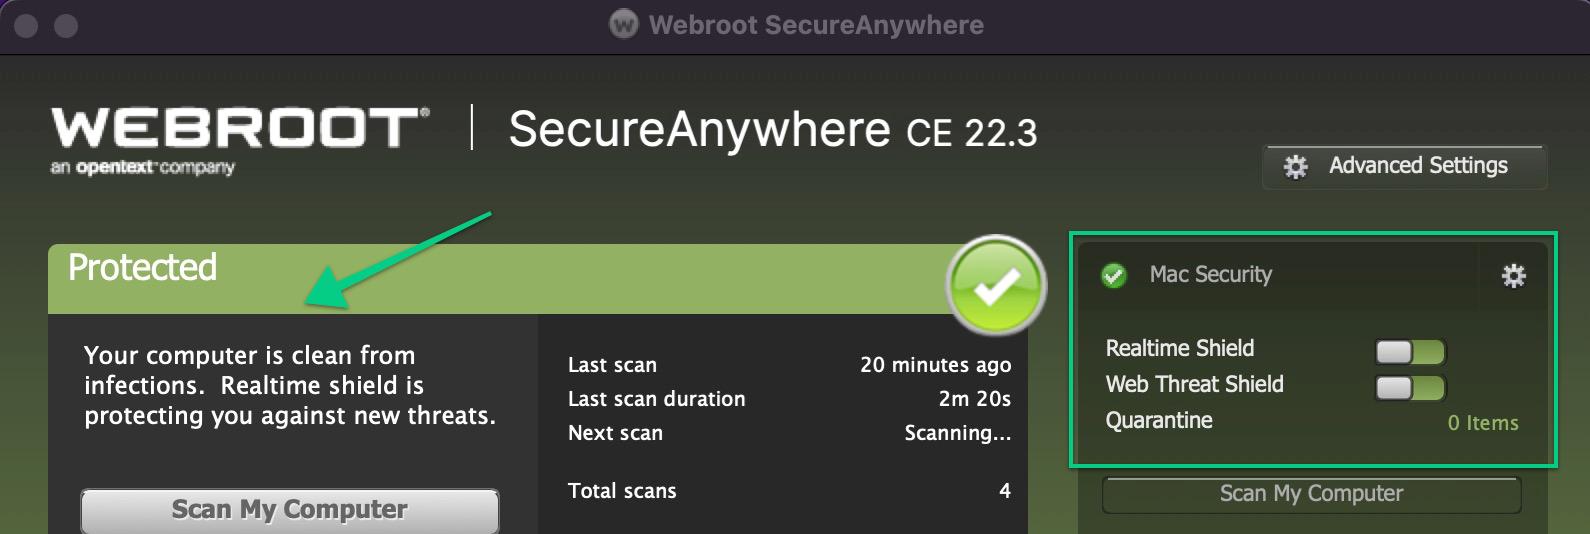 A screenshot of the Webroot antivirus main window showing that Realtime Shield is on.